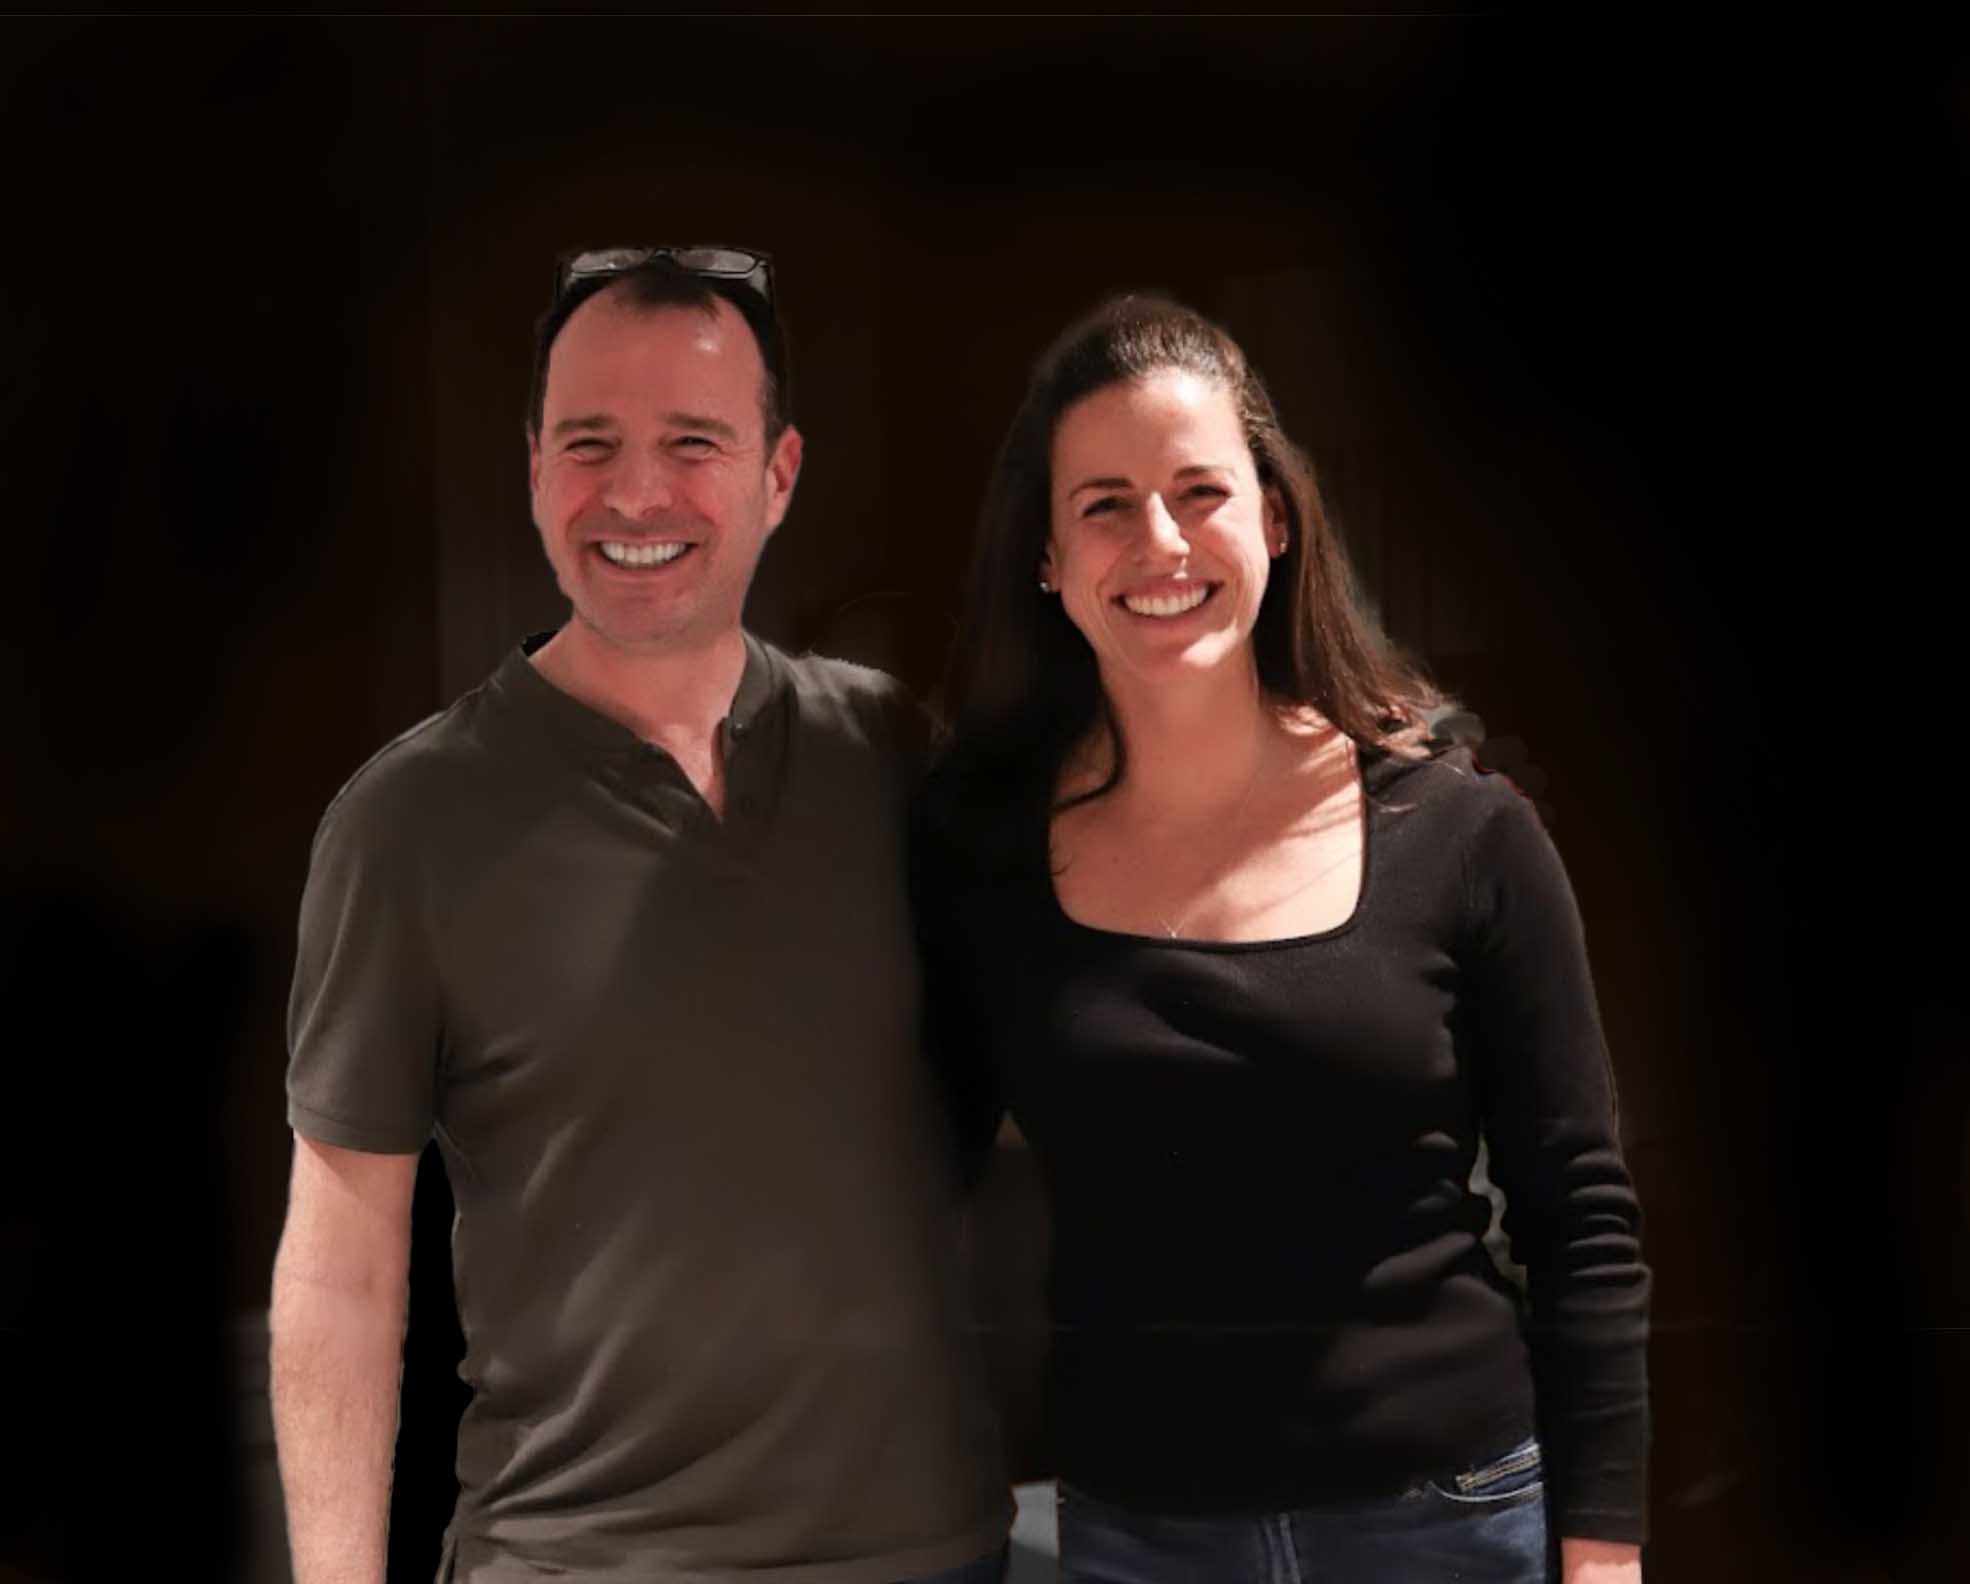 Greg and Jess are teaming up to help founders